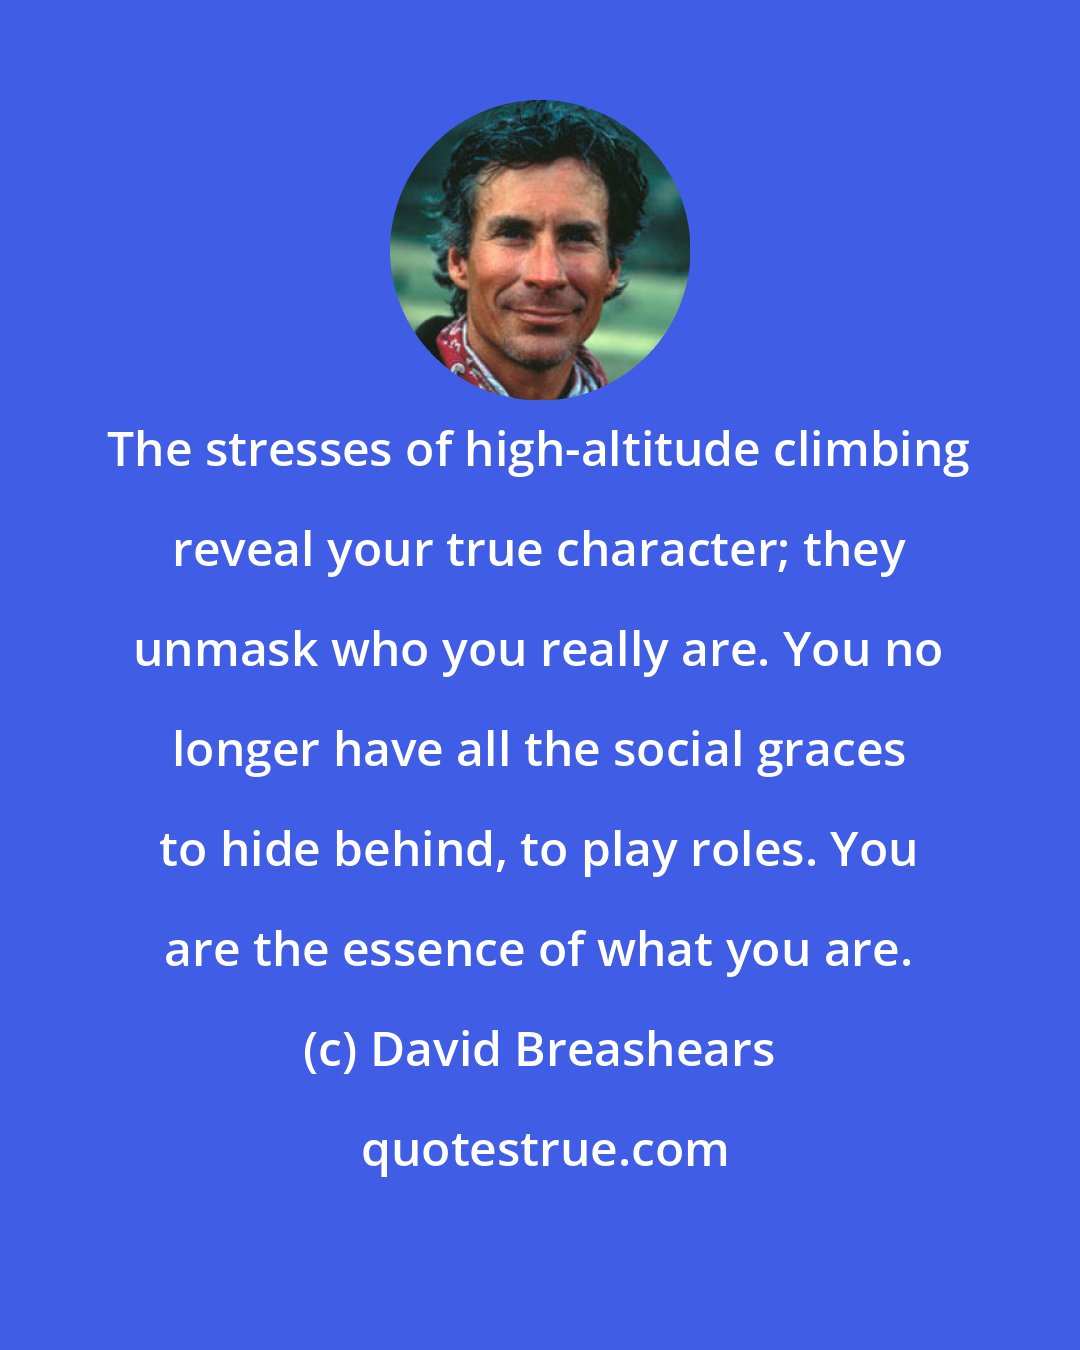 David Breashears: The stresses of high-altitude climbing reveal your true character; they unmask who you really are. You no longer have all the social graces to hide behind, to play roles. You are the essence of what you are.